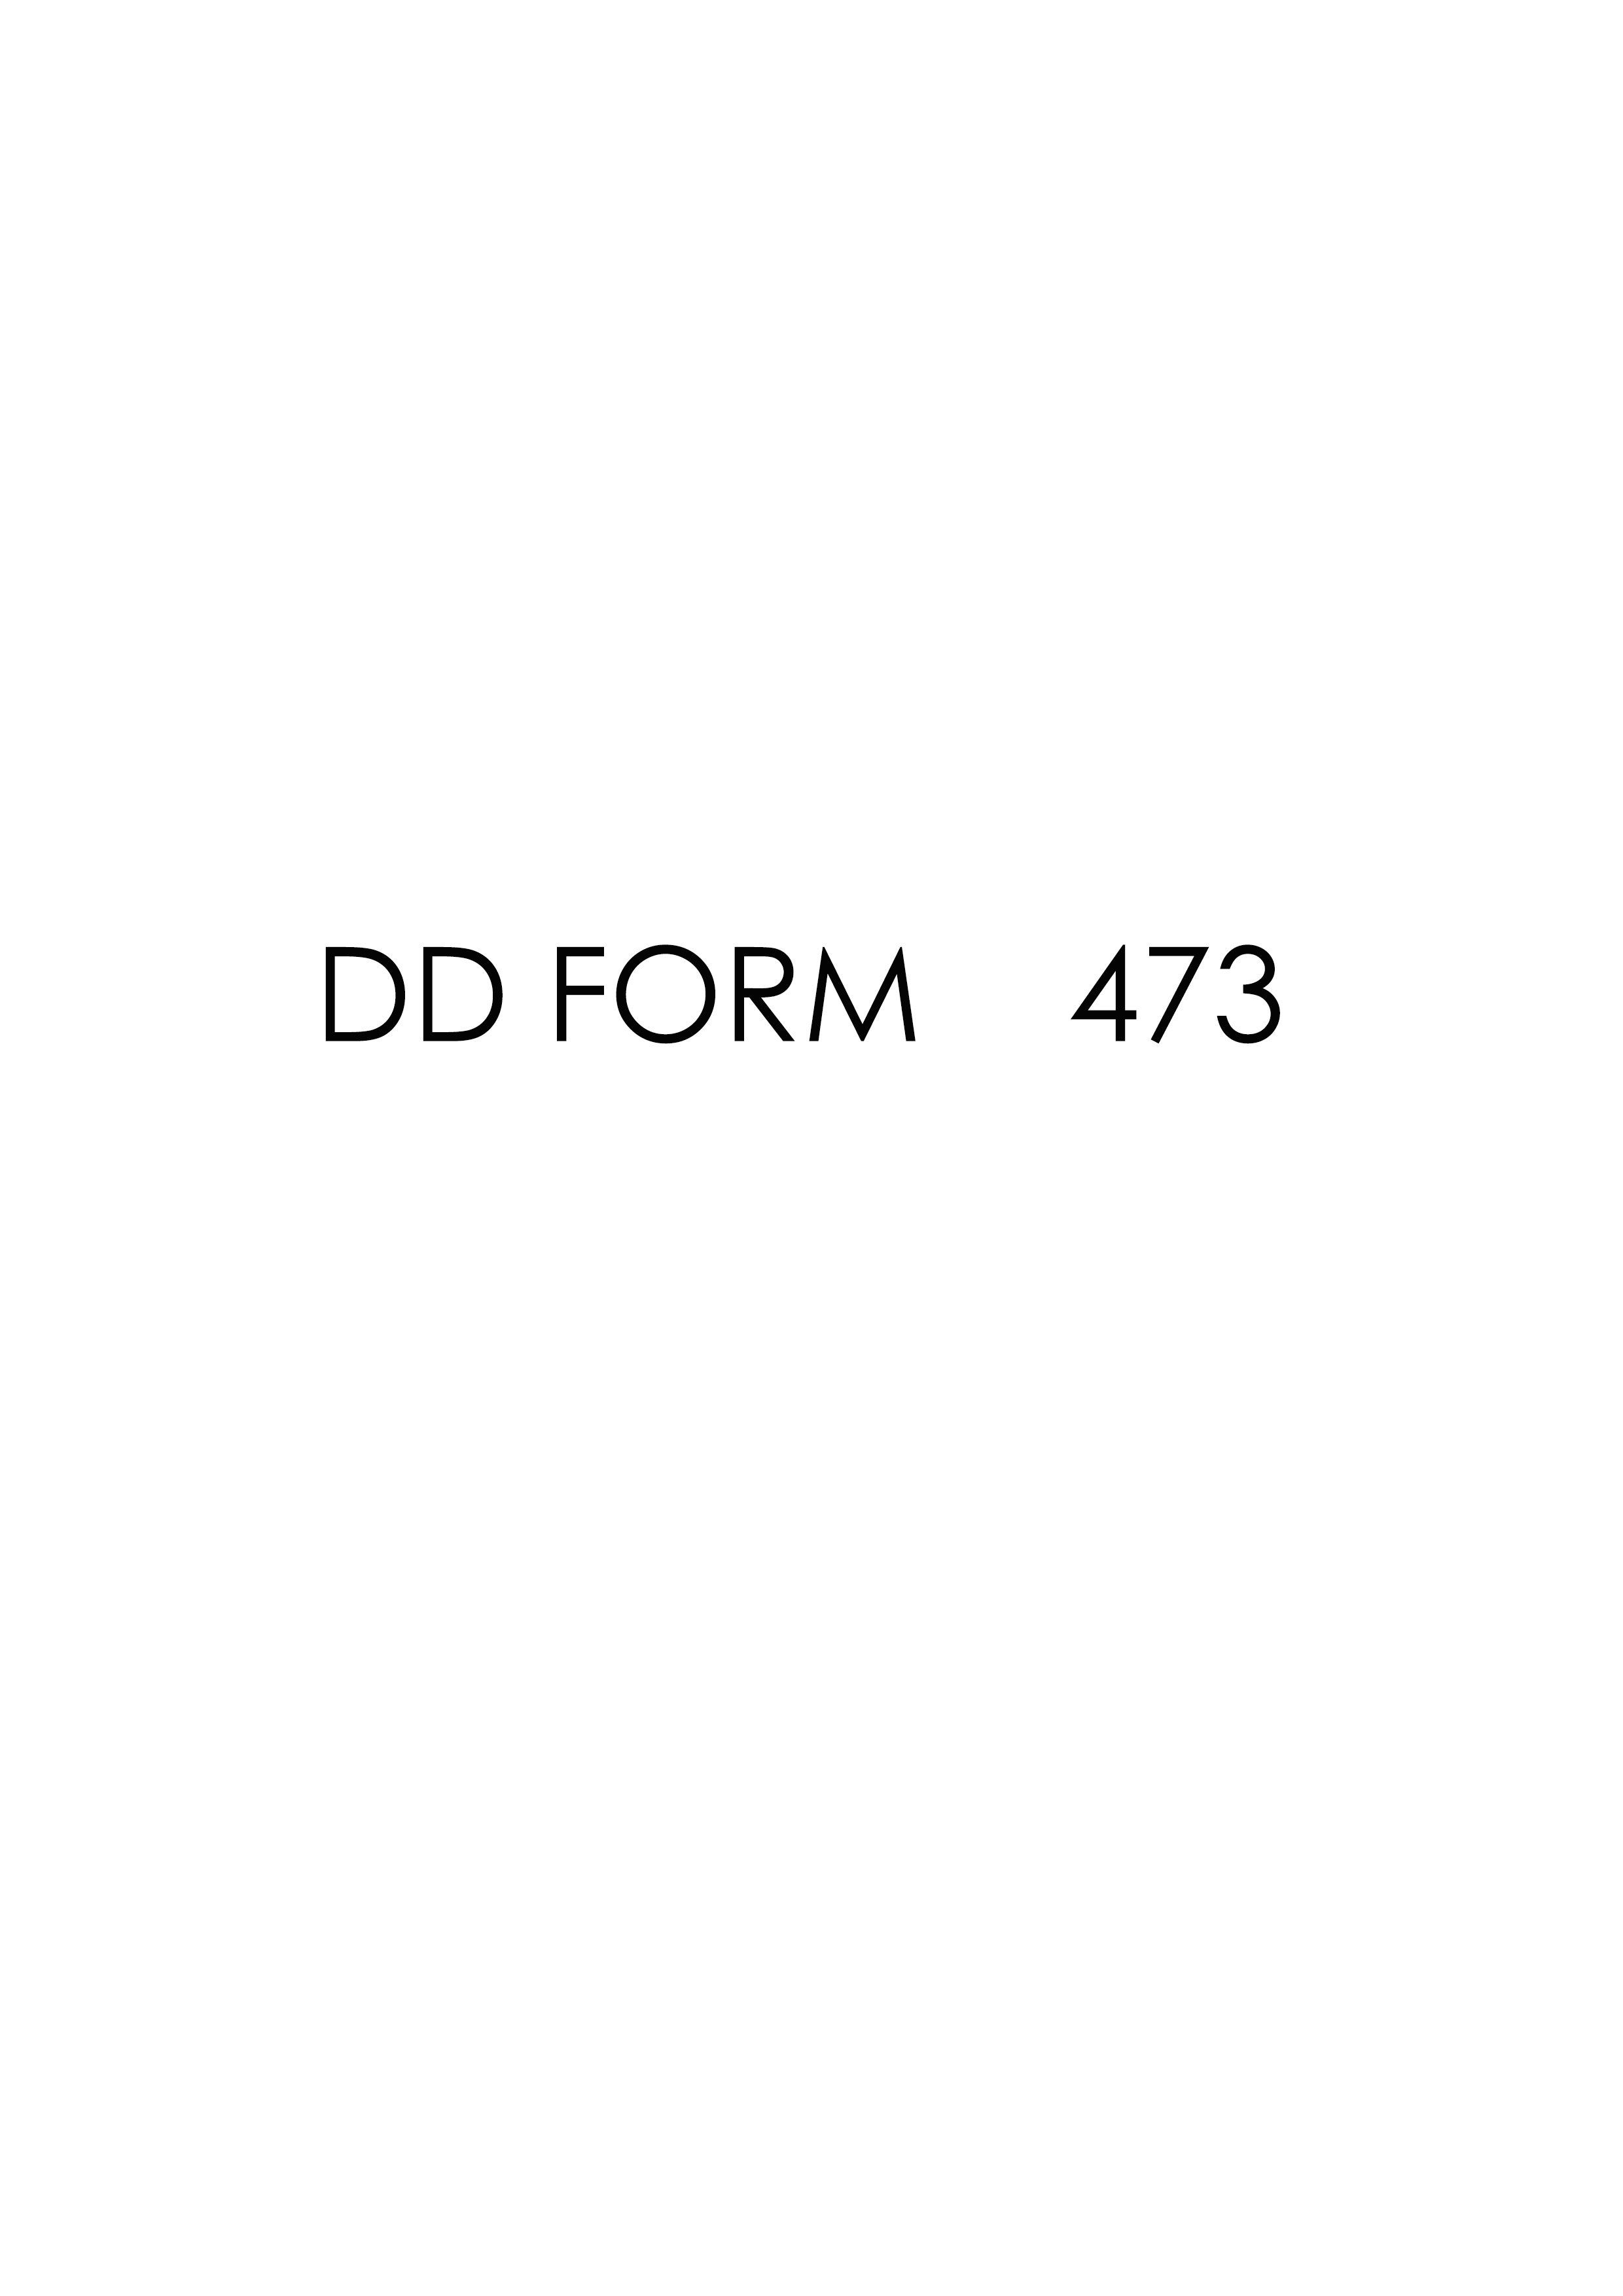 Download Fillable dd Form 473